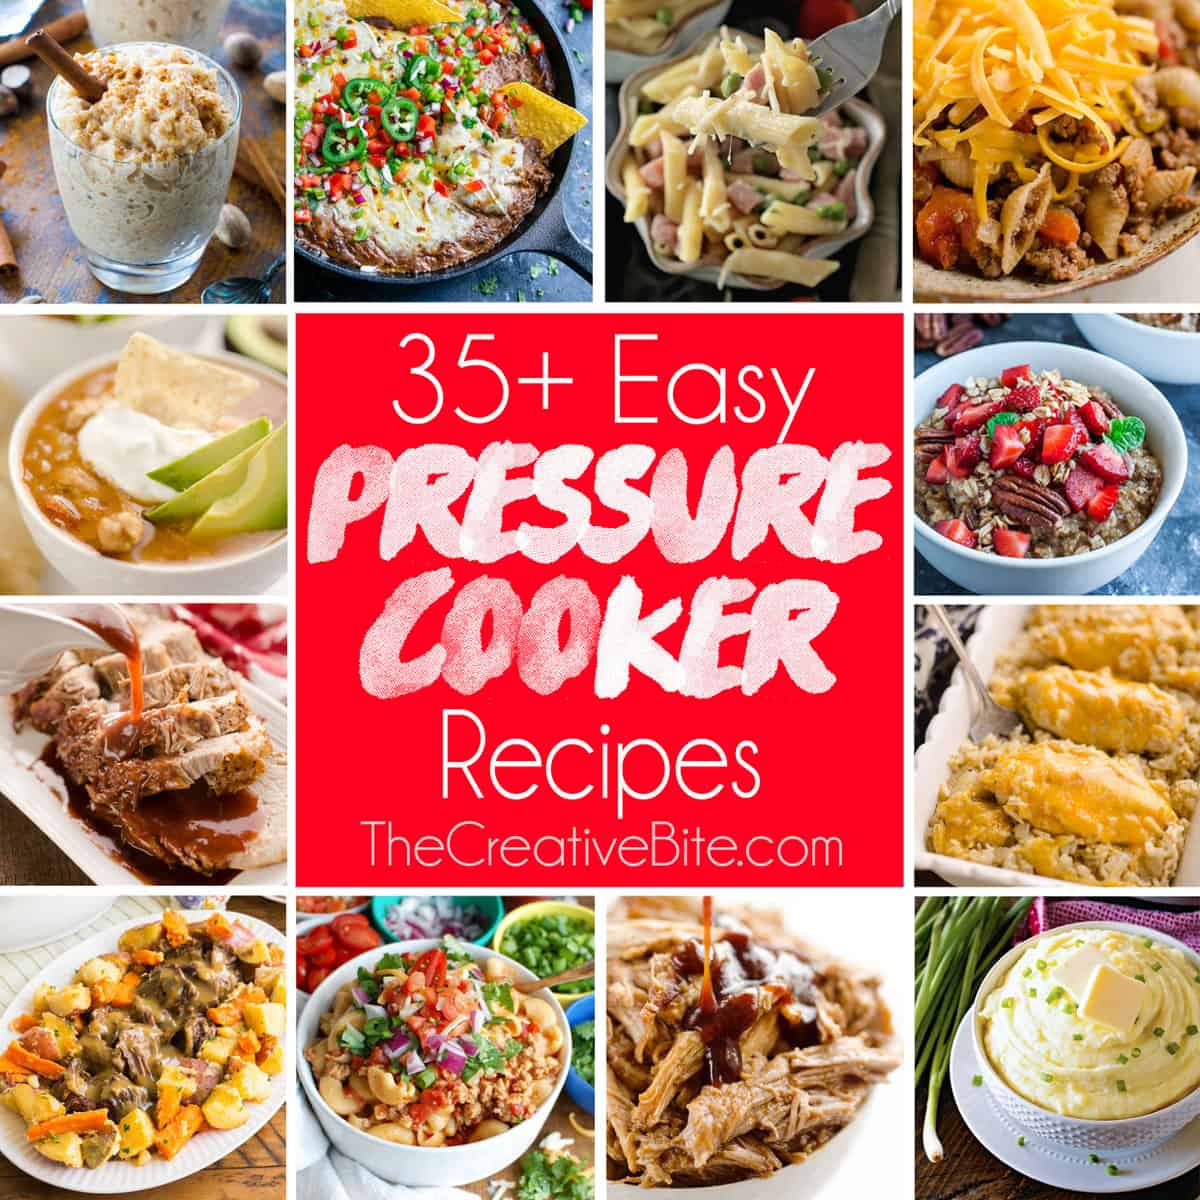 Easy Electric Pressure Cooker Recipes for your Instant Pot are perfect for beginners and anyone looking for new and exciting dinner ideas. 